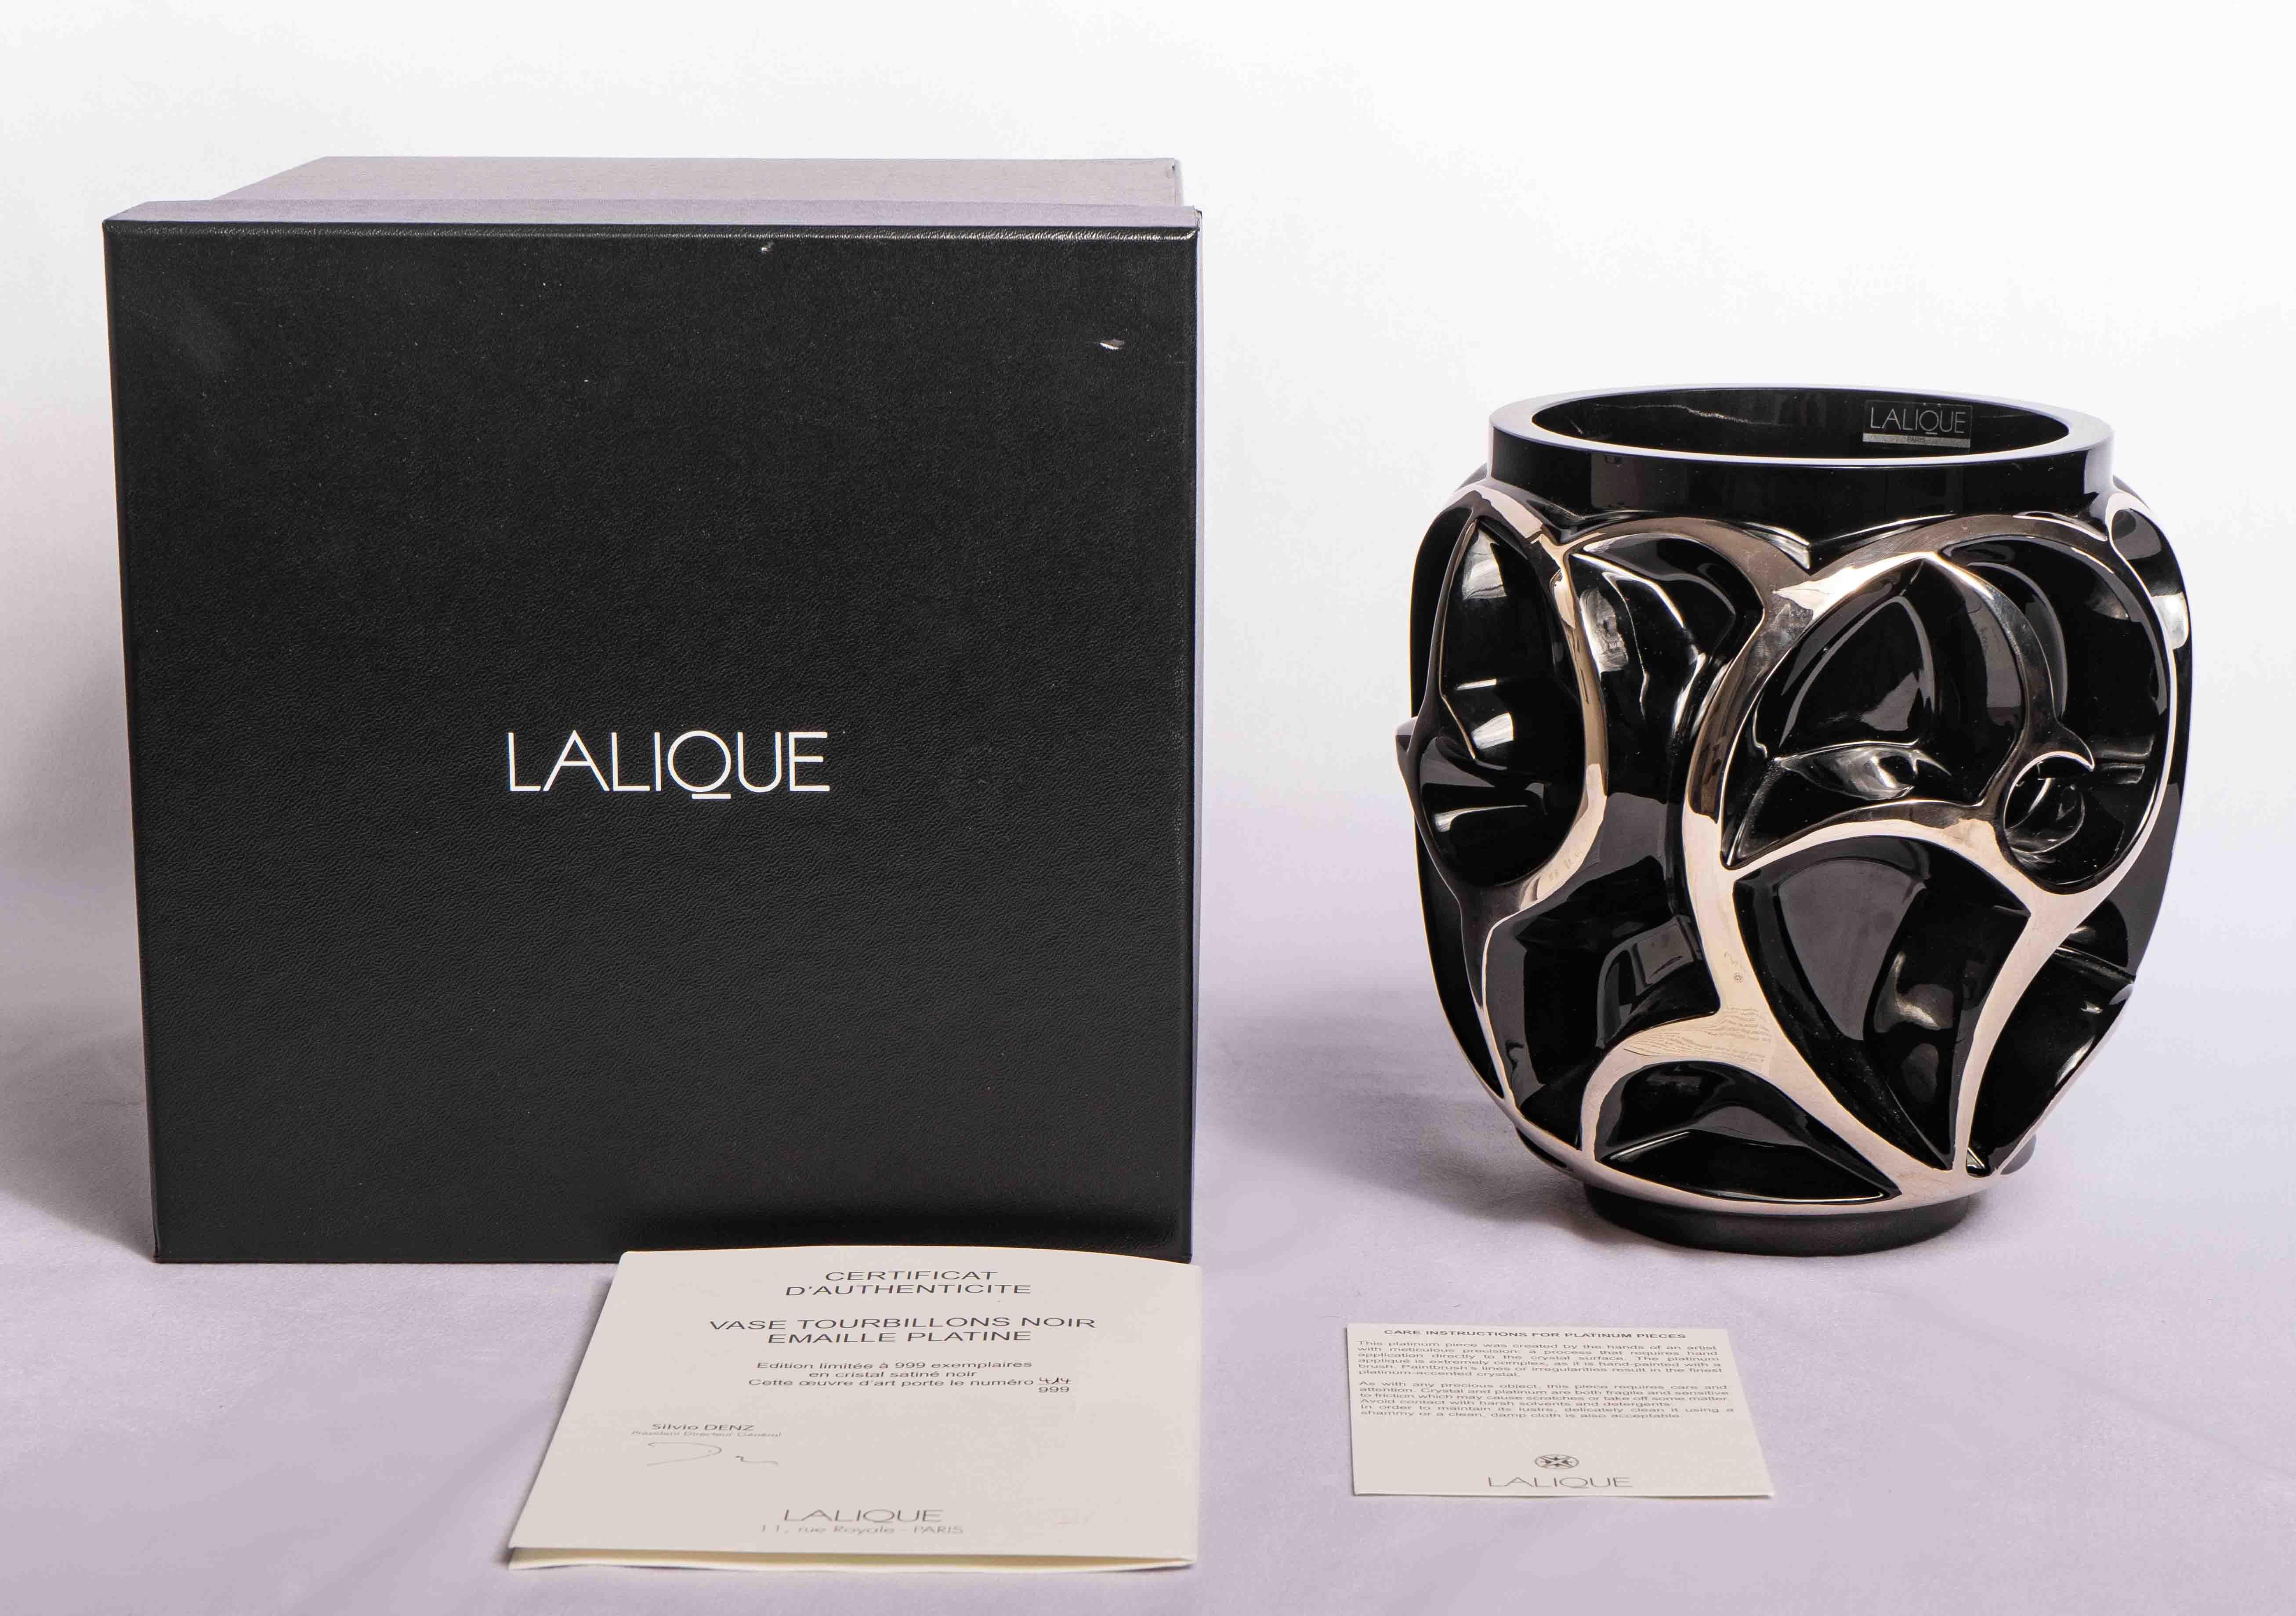 Molded Lalique Limited Edition Tourbillons Vase Black Crystal with Platinium Enamel